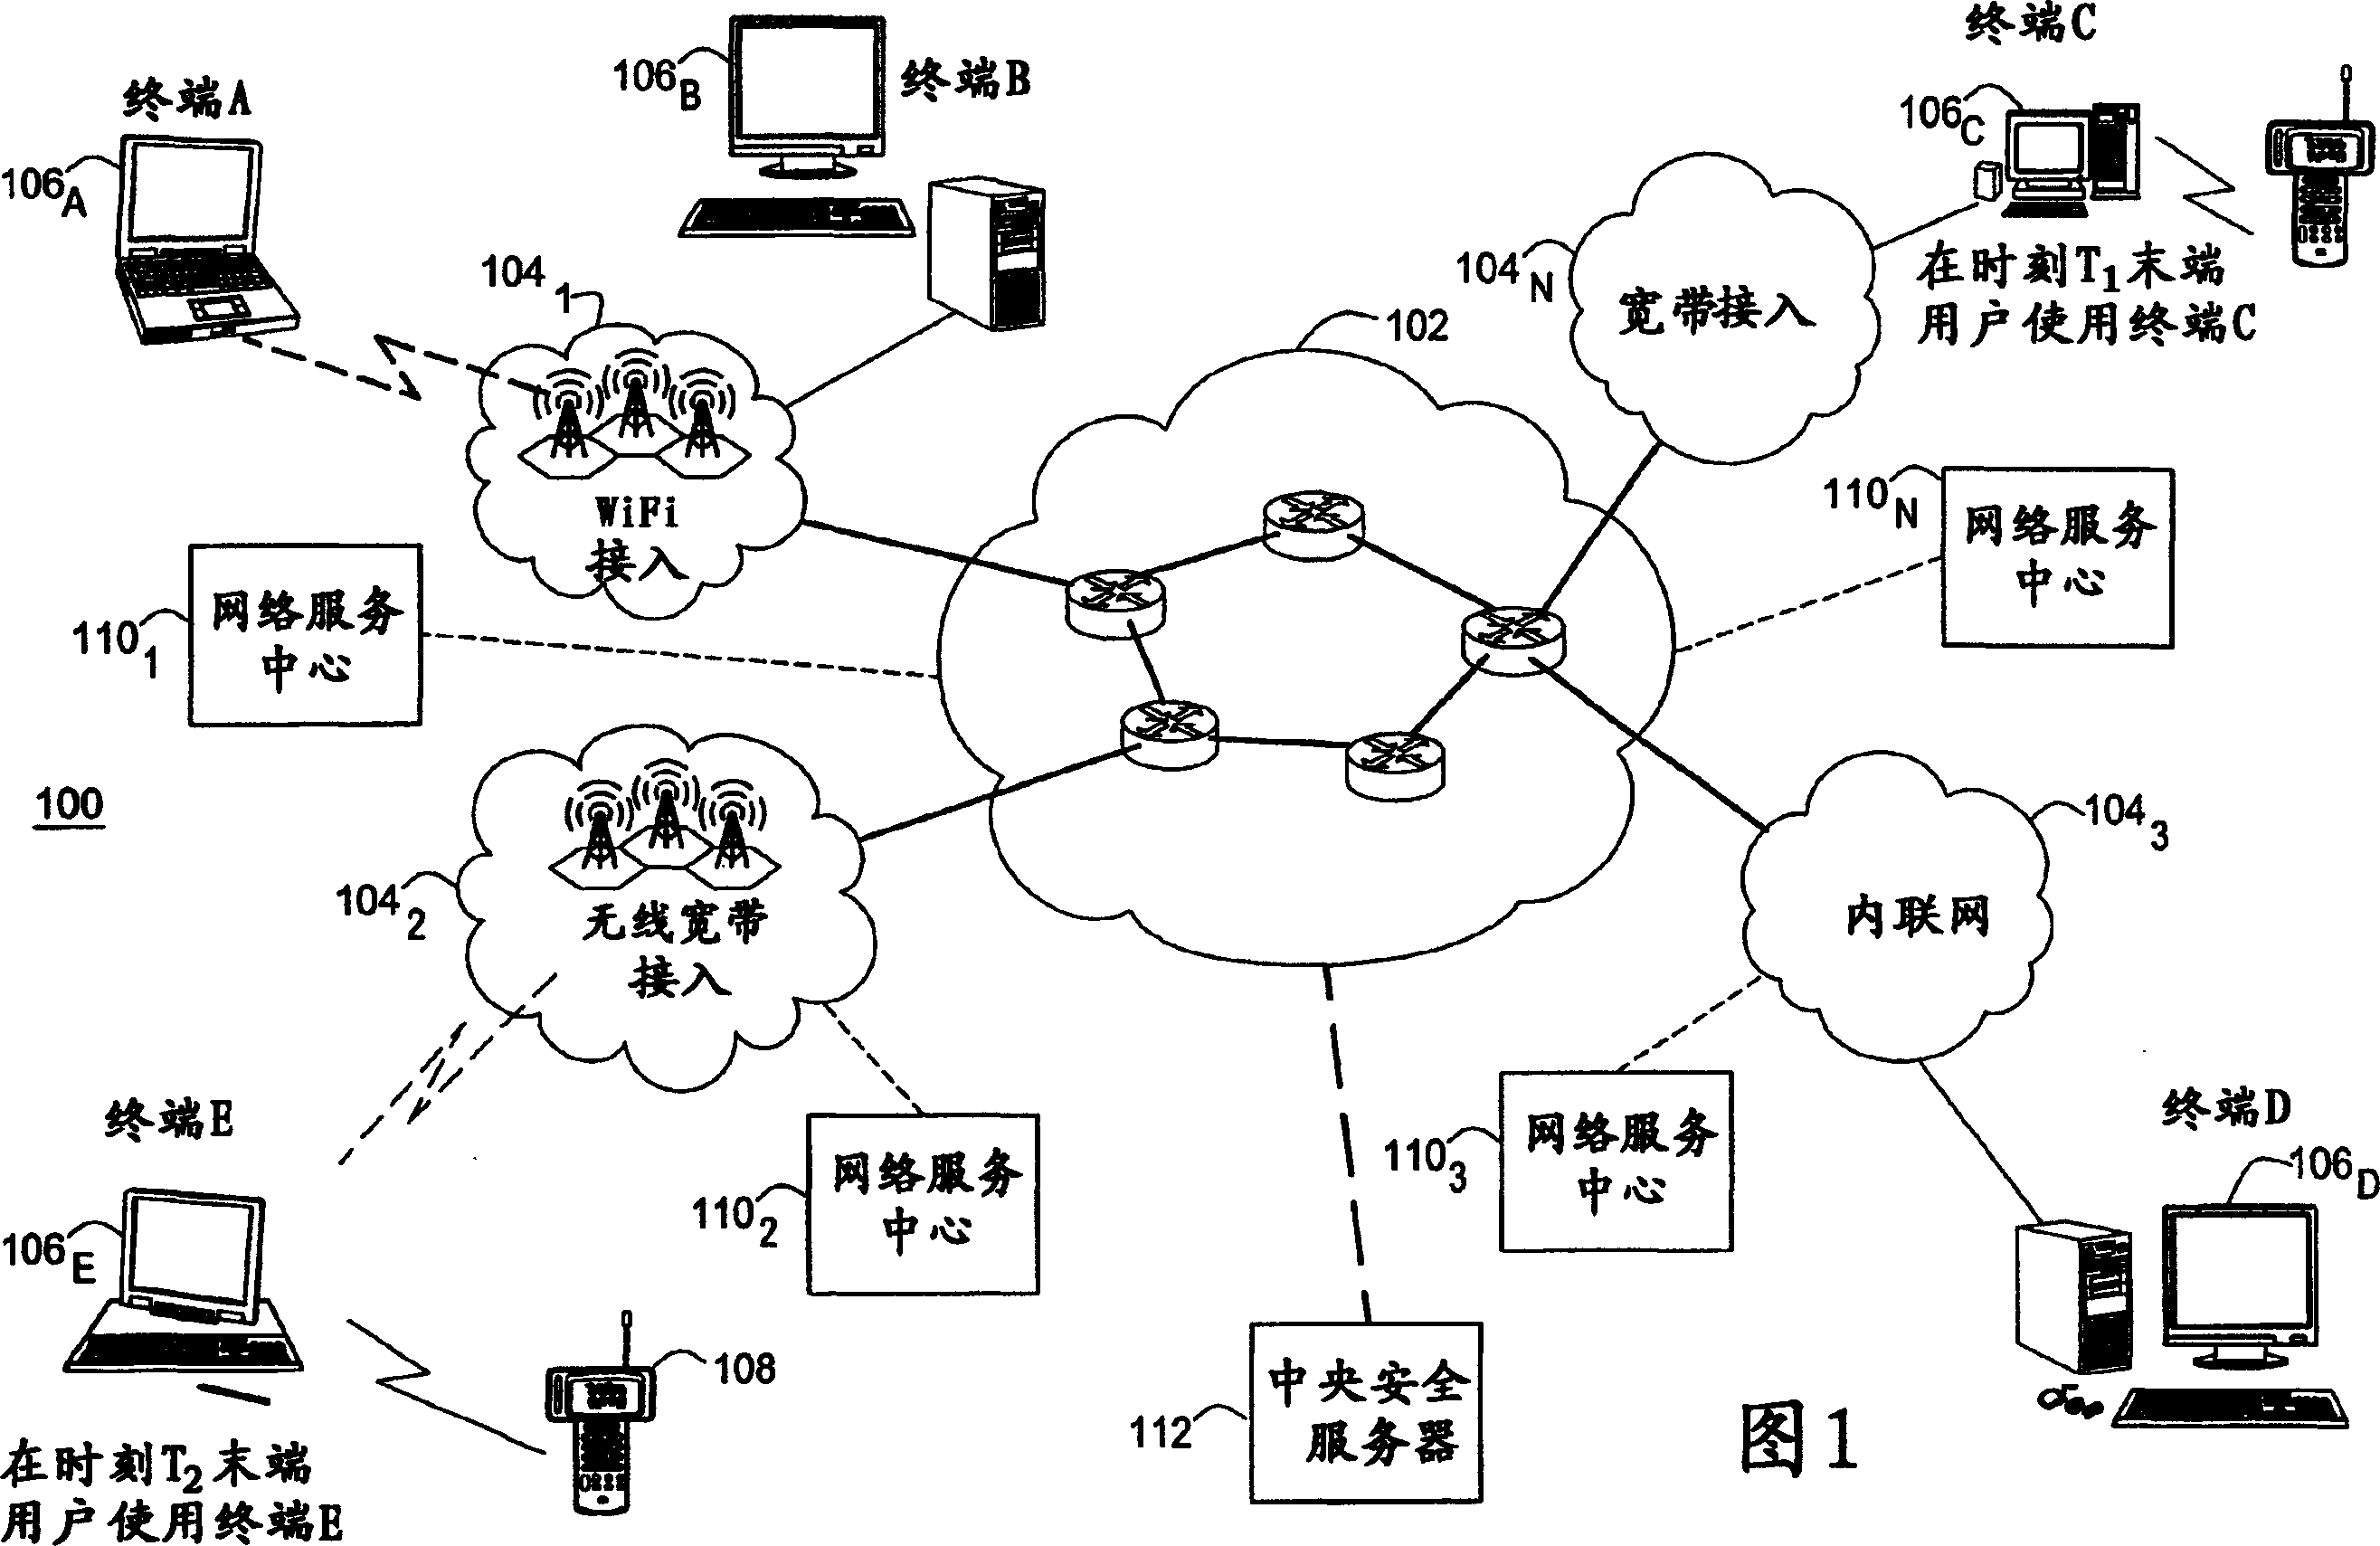 Method and apparatus for providing same session switchover between end-user terminals